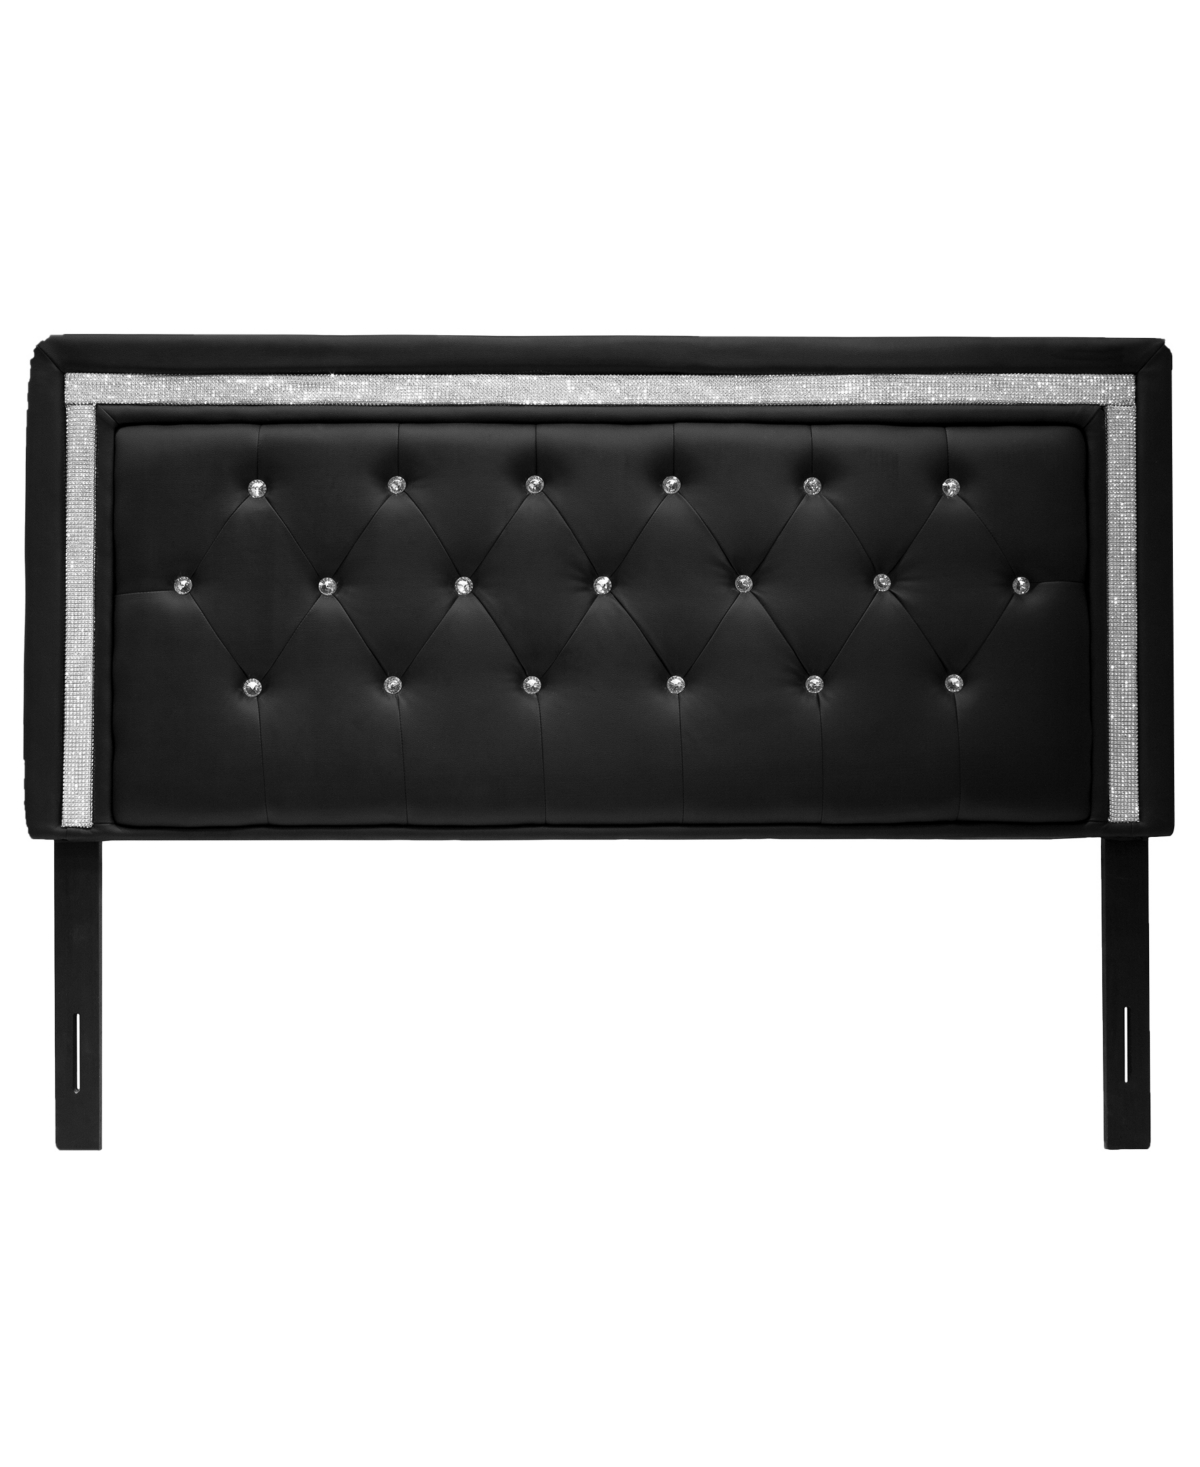 Maria Faux Leather Upholstered Headboard Tufted Crystals Rhinestone, Full/Queen